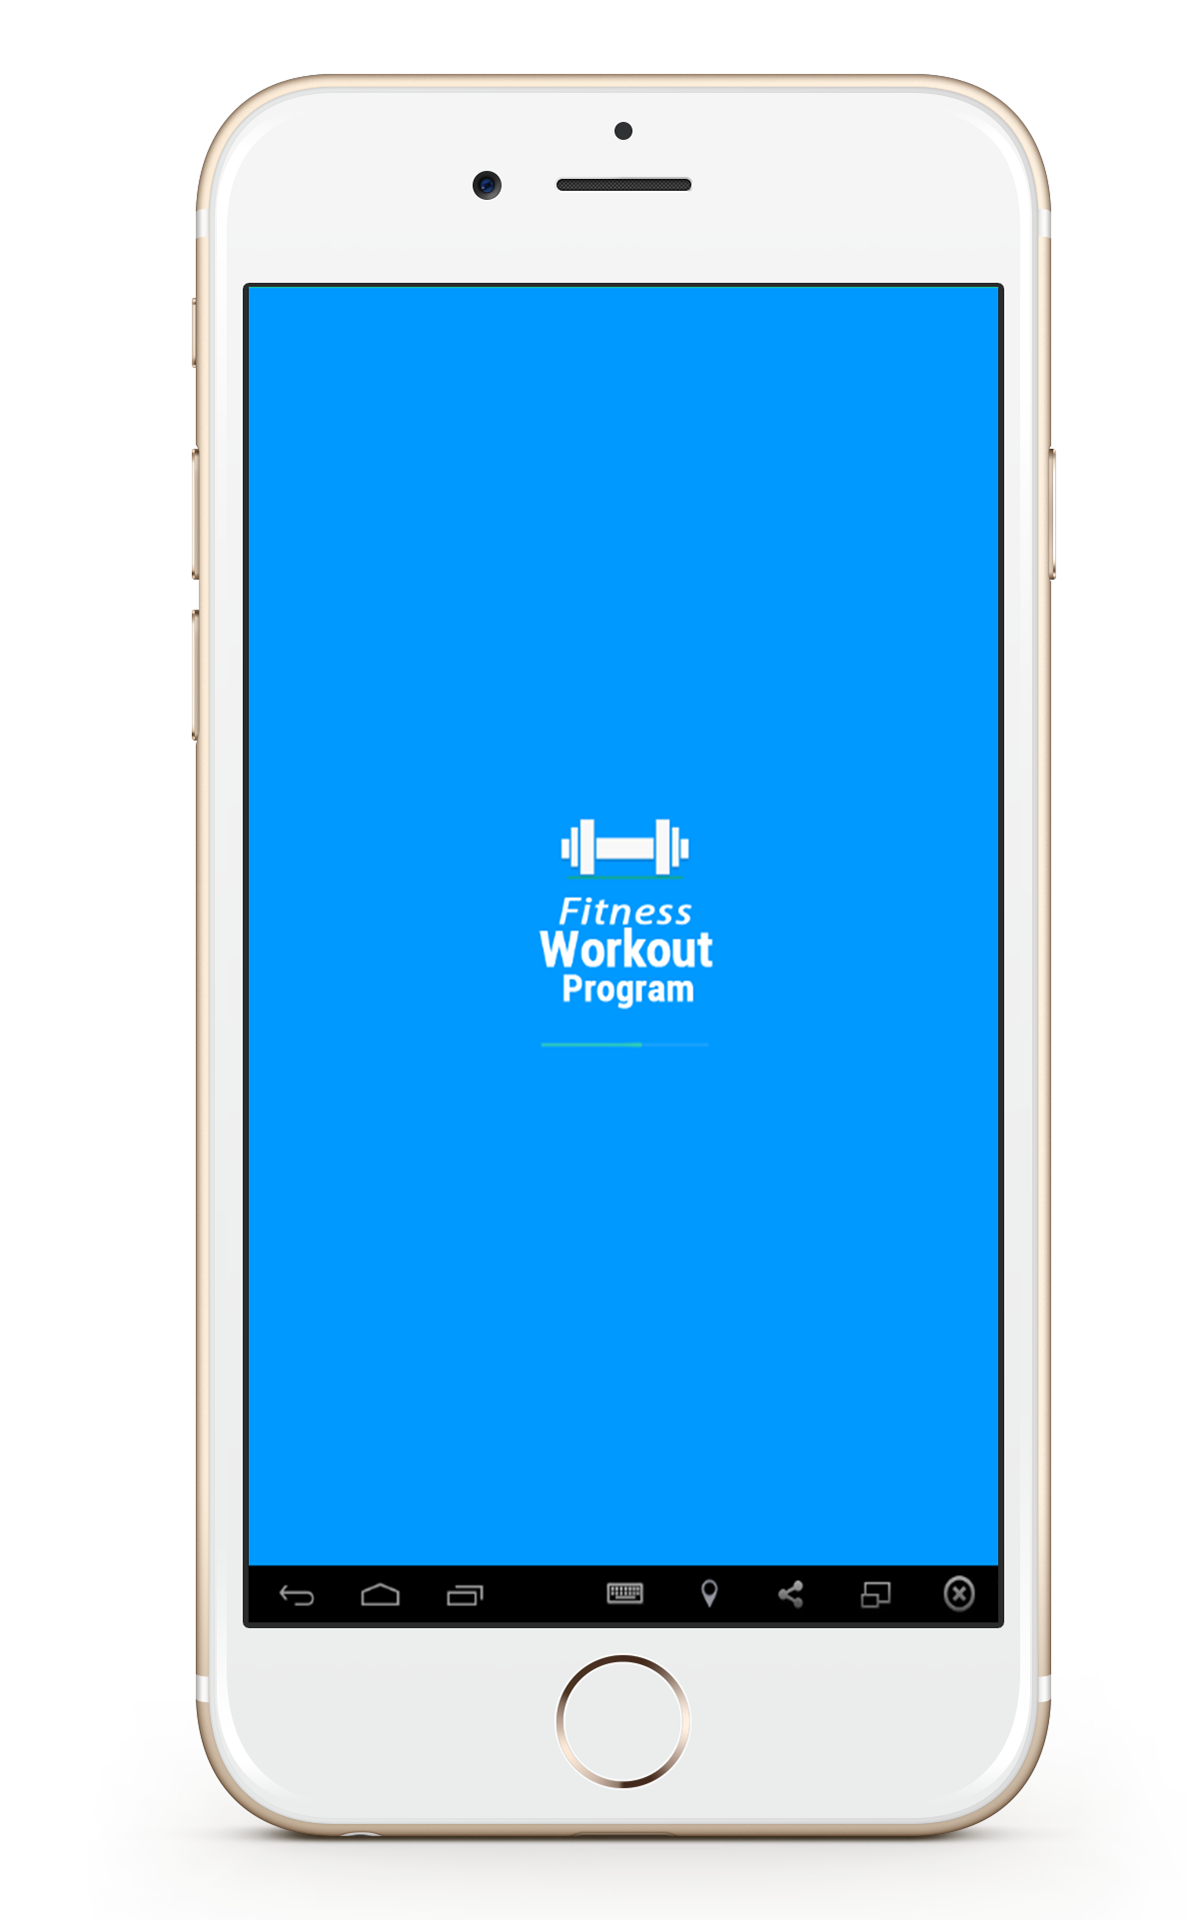 Android application Bodybuilding &amp; Fitness workout screenshort